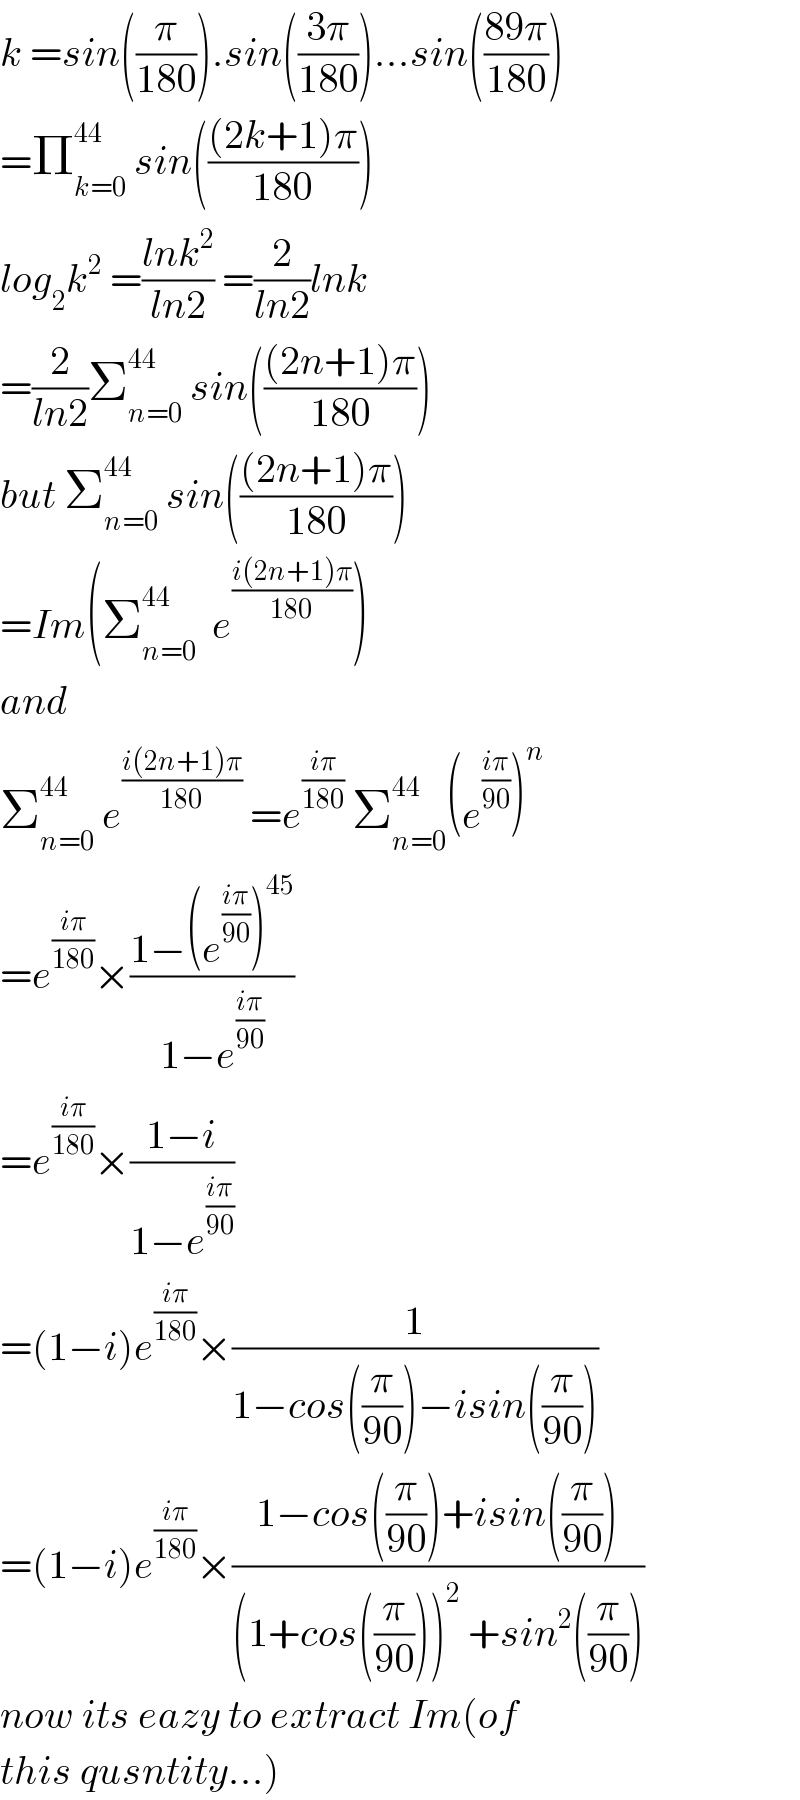 k =sin((π/(180))).sin(((3π)/(180)))...sin(((89π)/(180)))  =Π_(k=0) ^(44)  sin((((2k+1)π)/(180)))  log_2 k^2  =((lnk^2 )/(ln2)) =(2/(ln2))lnk  =(2/(ln2))Σ_(n=0) ^(44)  sin((((2n+1)π)/(180)))  but Σ_(n=0) ^(44)  sin((((2n+1)π)/(180)))  =Im(Σ_(n=0) ^(44)   e^((i(2n+1)π)/(180)) )  and  Σ_(n=0) ^(44)  e^((i(2n+1)π)/(180))  =e^((iπ)/(180))  Σ_(n=0) ^(44 ) (e^((iπ)/(90)) )^n   =e^((iπ)/(180)) ×((1−(e^((iπ)/(90)) )^(45) )/(1−e^((iπ)/(90)) ))  =e^((iπ)/(180)) ×((1−i)/(1−e^((iπ)/(90)) ))  =(1−i)e^((iπ)/(180)) ×(1/(1−cos((π/(90)))−isin((π/(90)))))  =(1−i)e^((iπ)/(180)) ×((1−cos((π/(90)))+isin((π/(90))))/((1+cos((π/(90))))^2  +sin^2 ((π/(90)))))  now its eazy to extract Im(of  this qusntity...)  